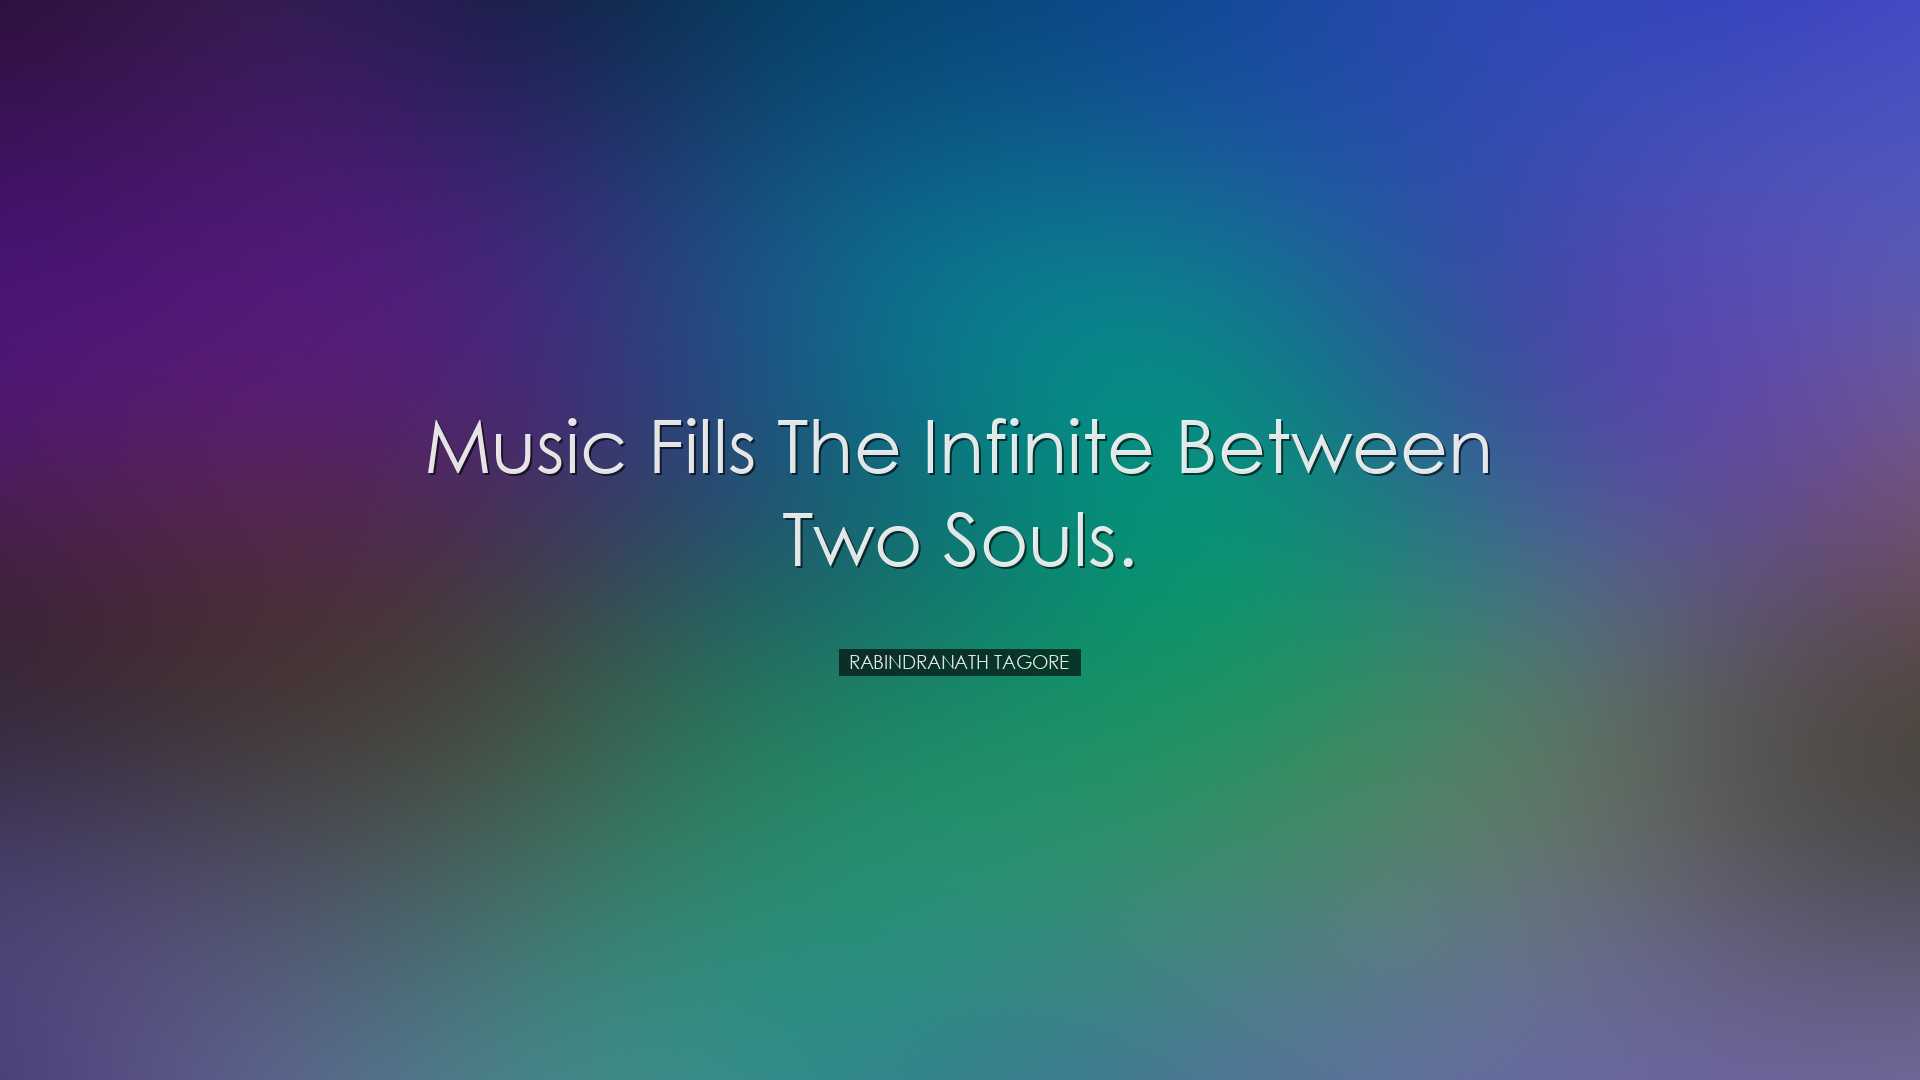 Music fills the infinite between two souls. - Rabindranath Tagore